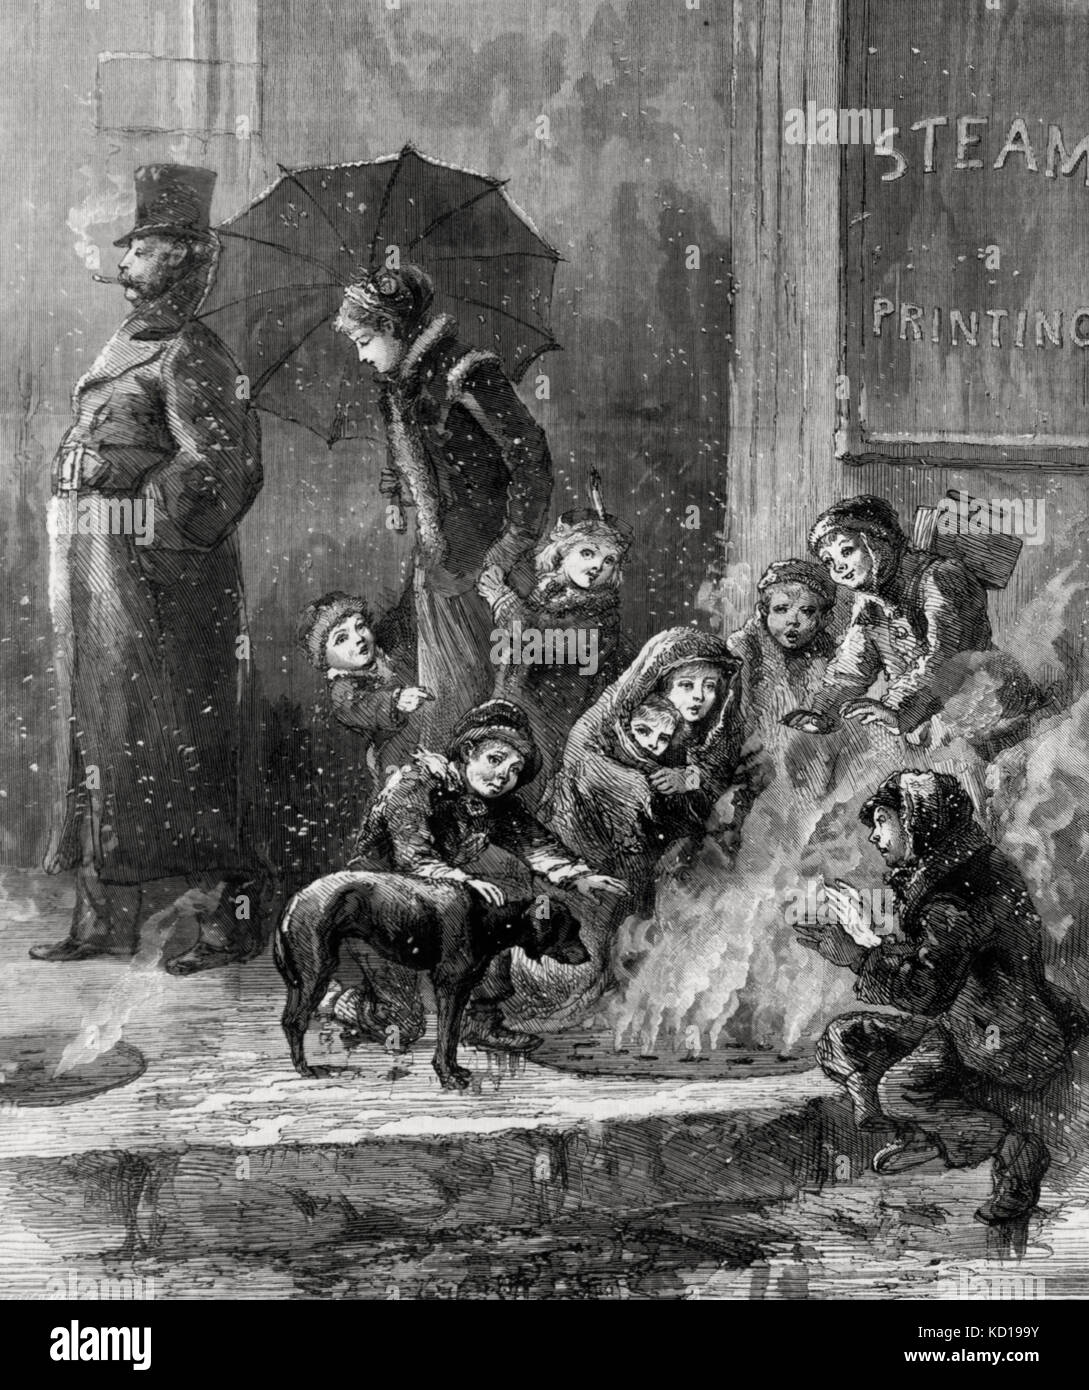 The Hearth stone of the poor -waste steam not wasted -  Homeless people heating themselves with steam rising from grating in pavement, while a disinterested wealthy family walks by.  1876 Stock Photo